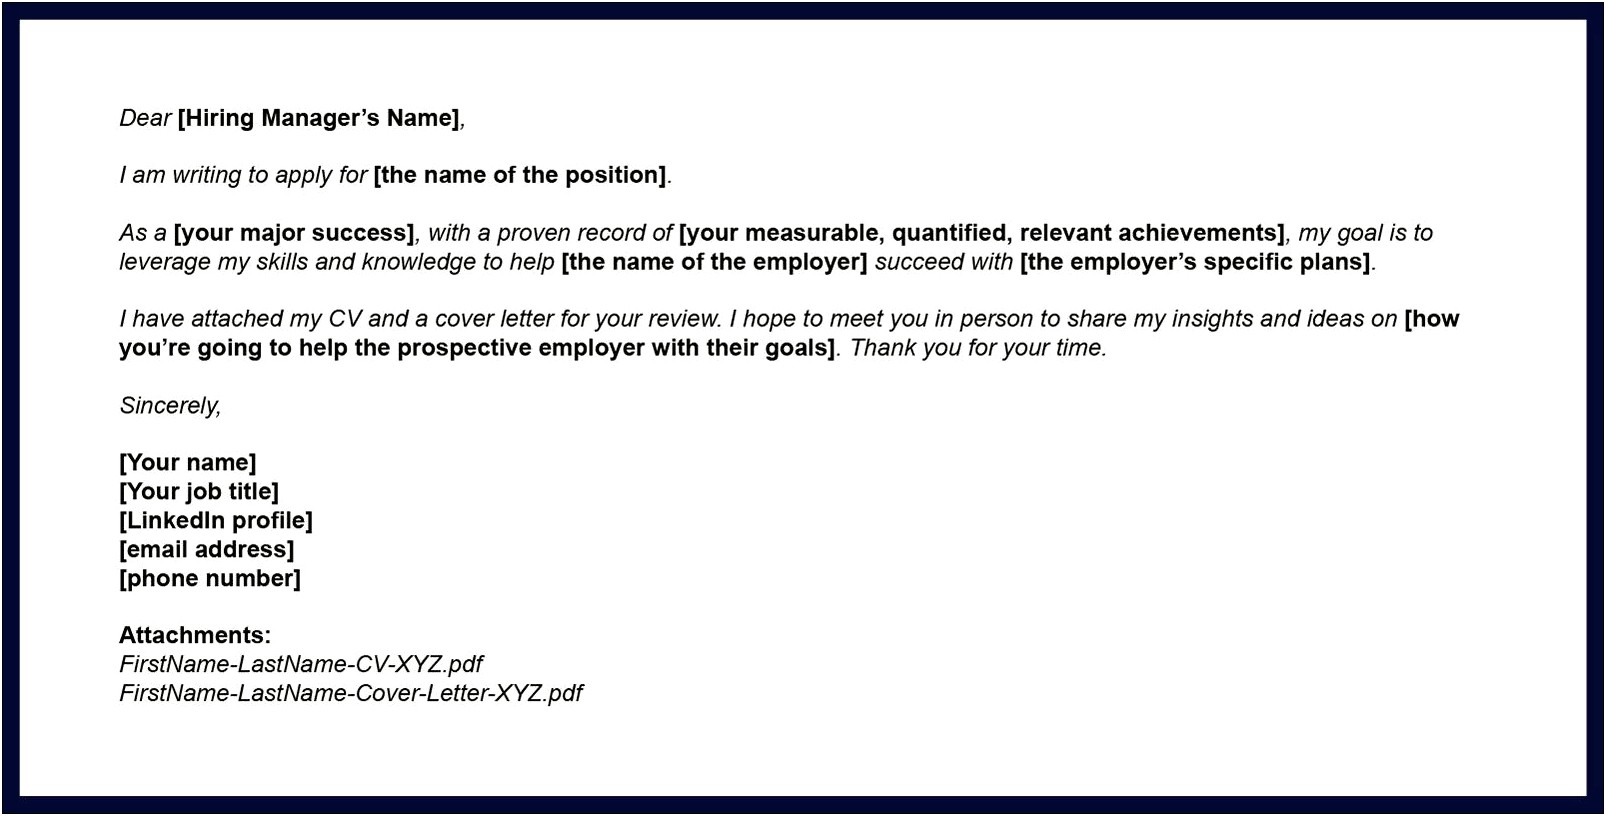 Applying Via Email With Resume And Cover Letter